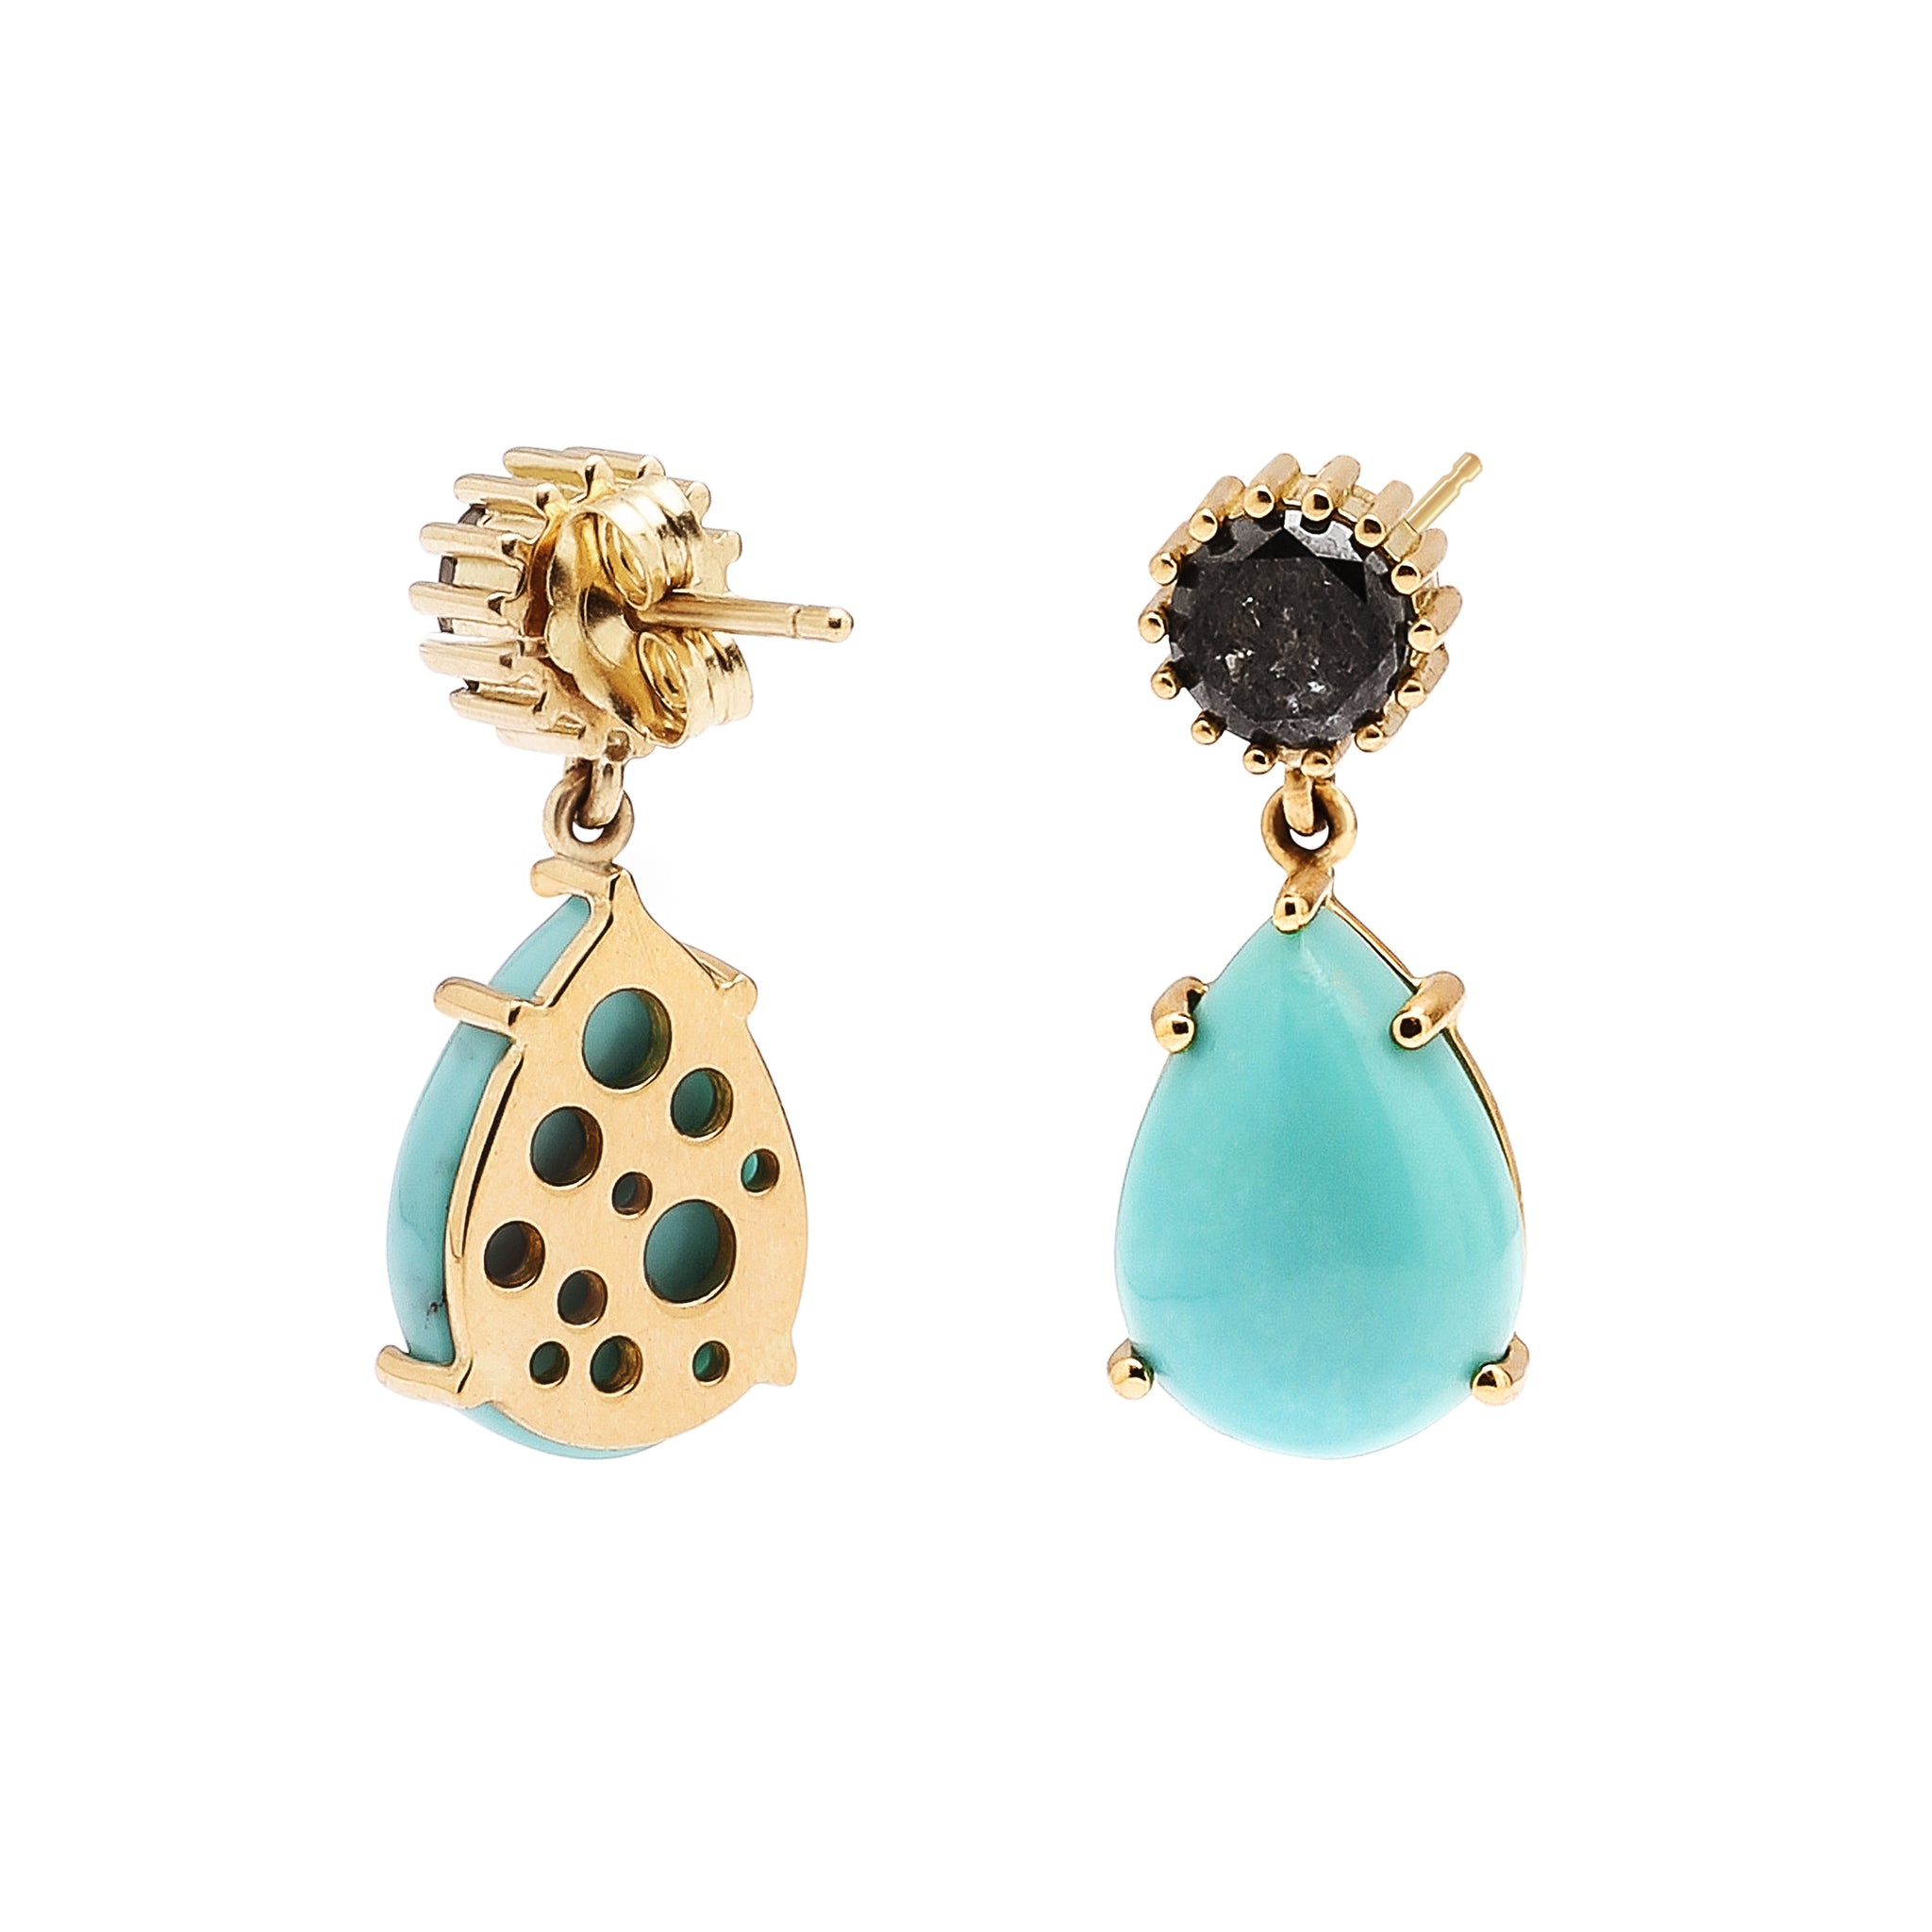 Oculus Back Small Drop Earrings, with Rose Cut Black Diamonds & Pear-Shaped Turquoise